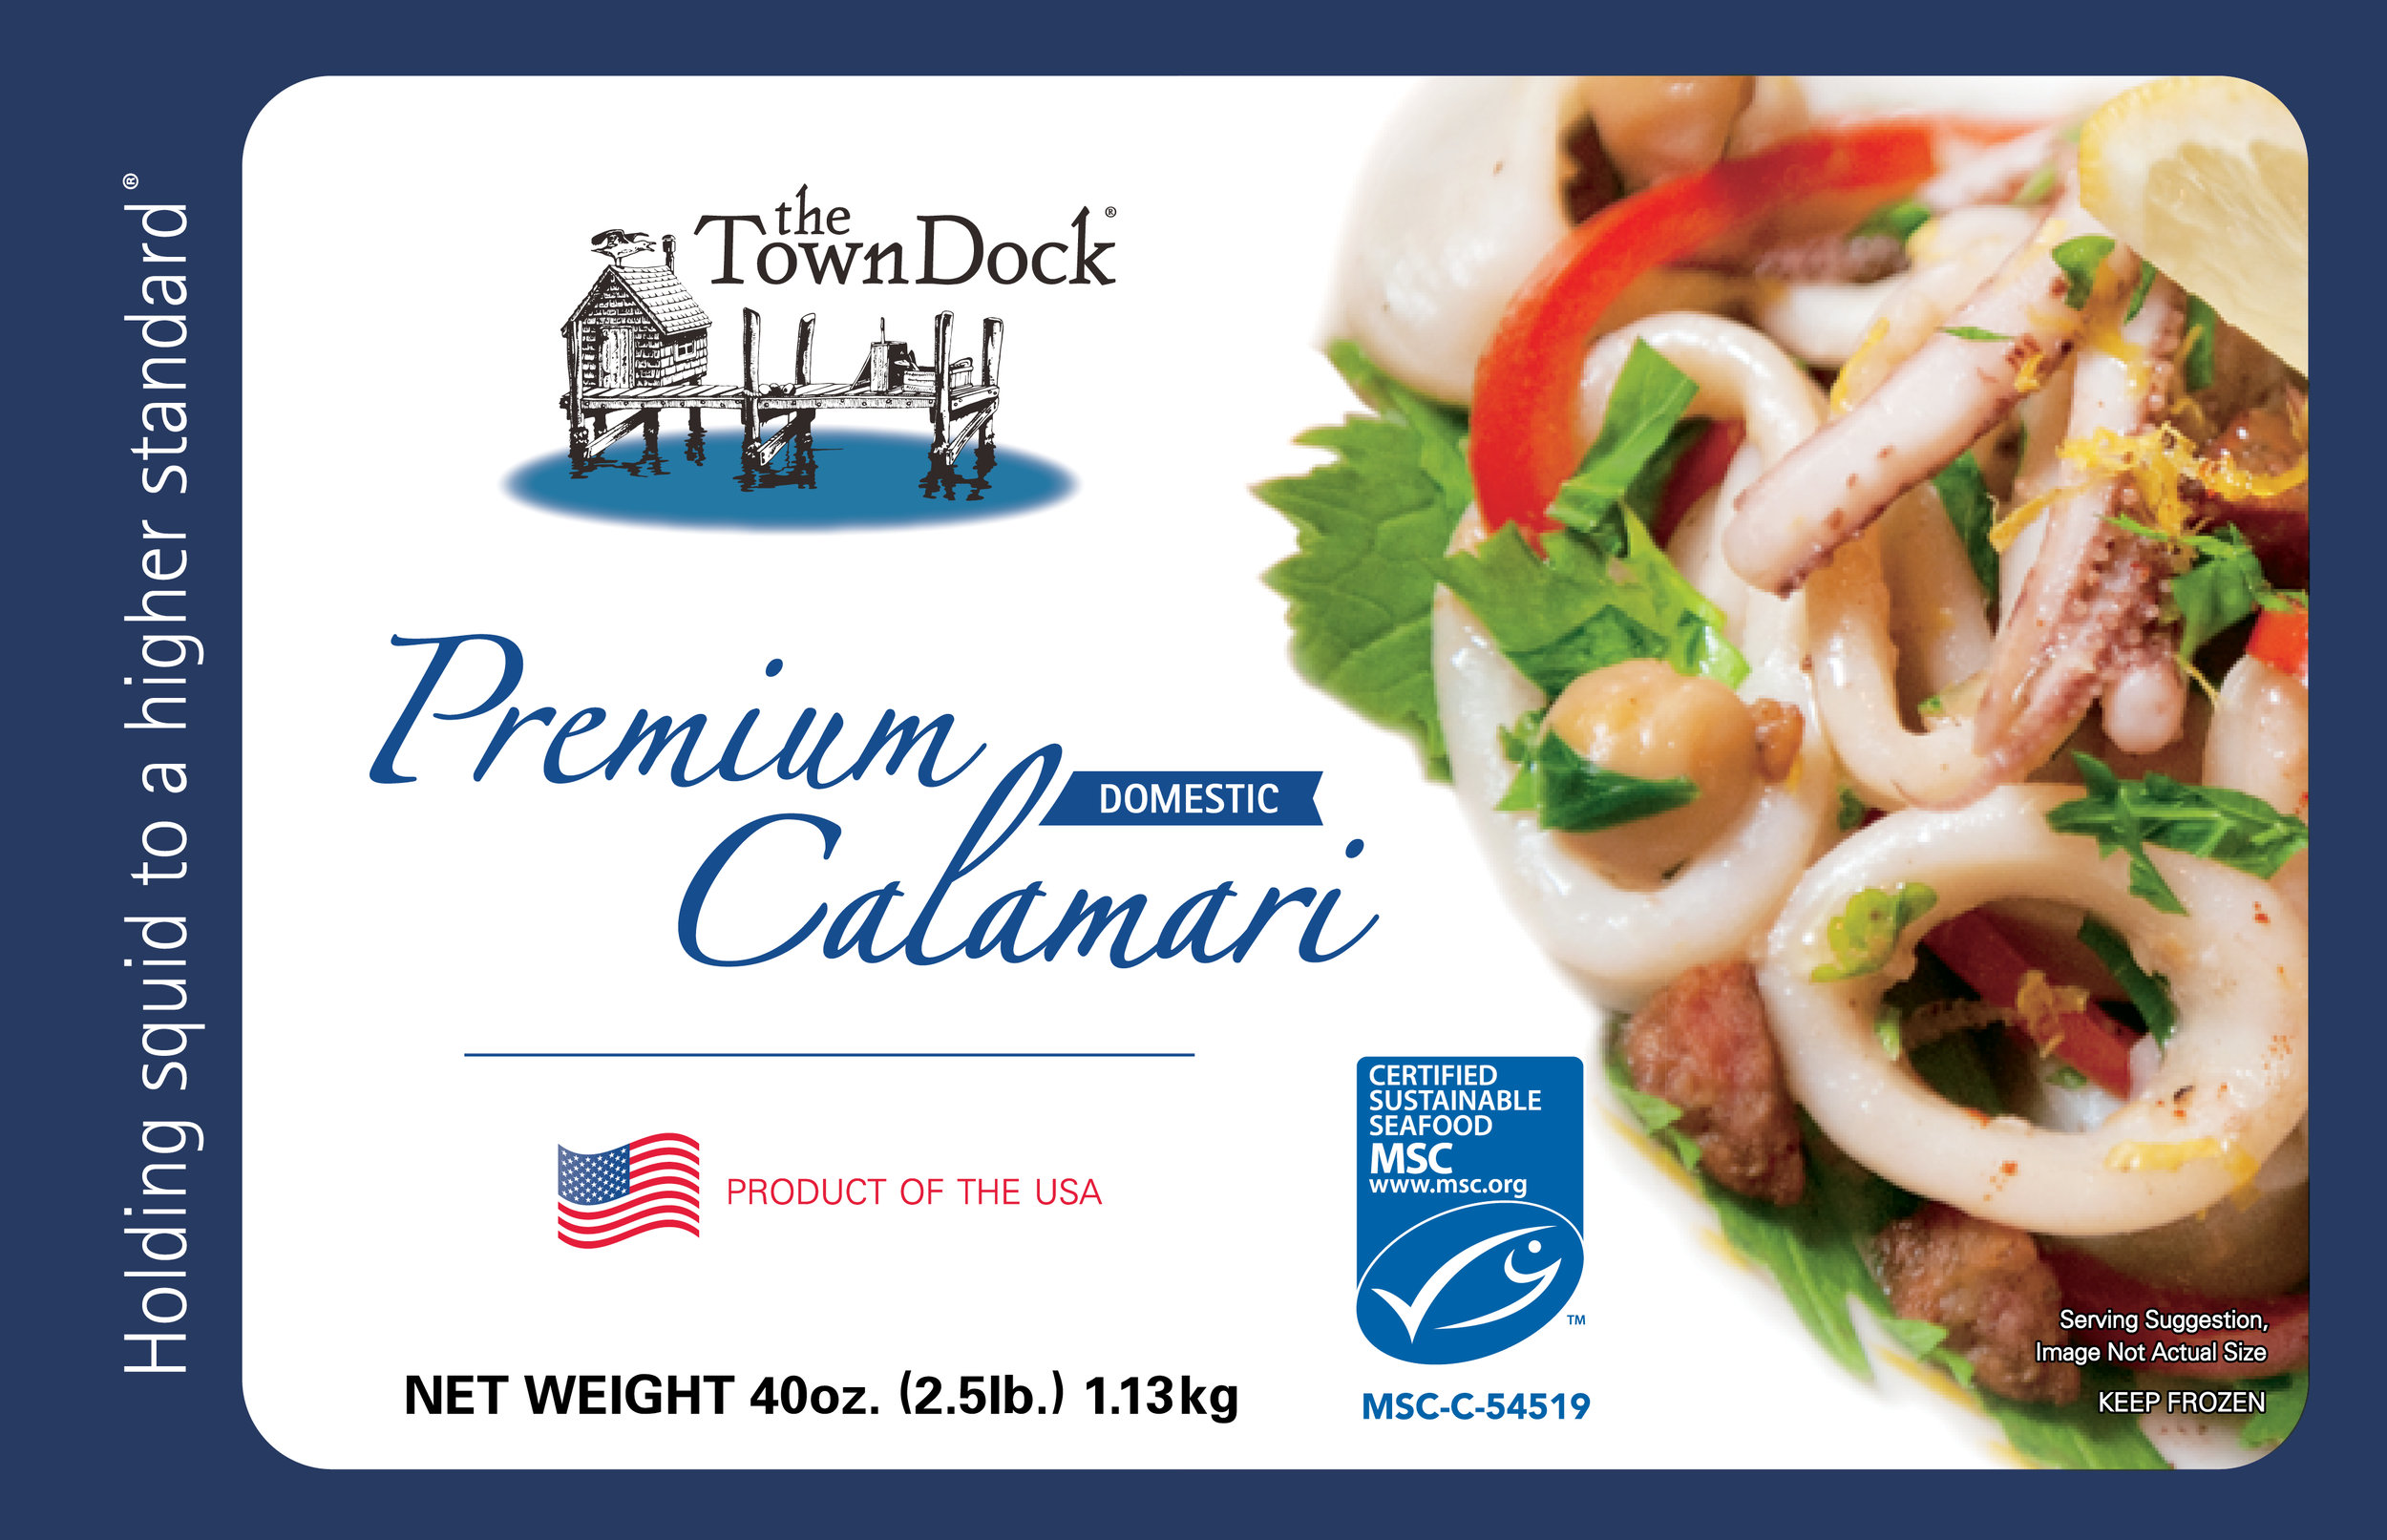 The front of our Premium Domestic Calamari bag, with MSC bluefish sustainability logo